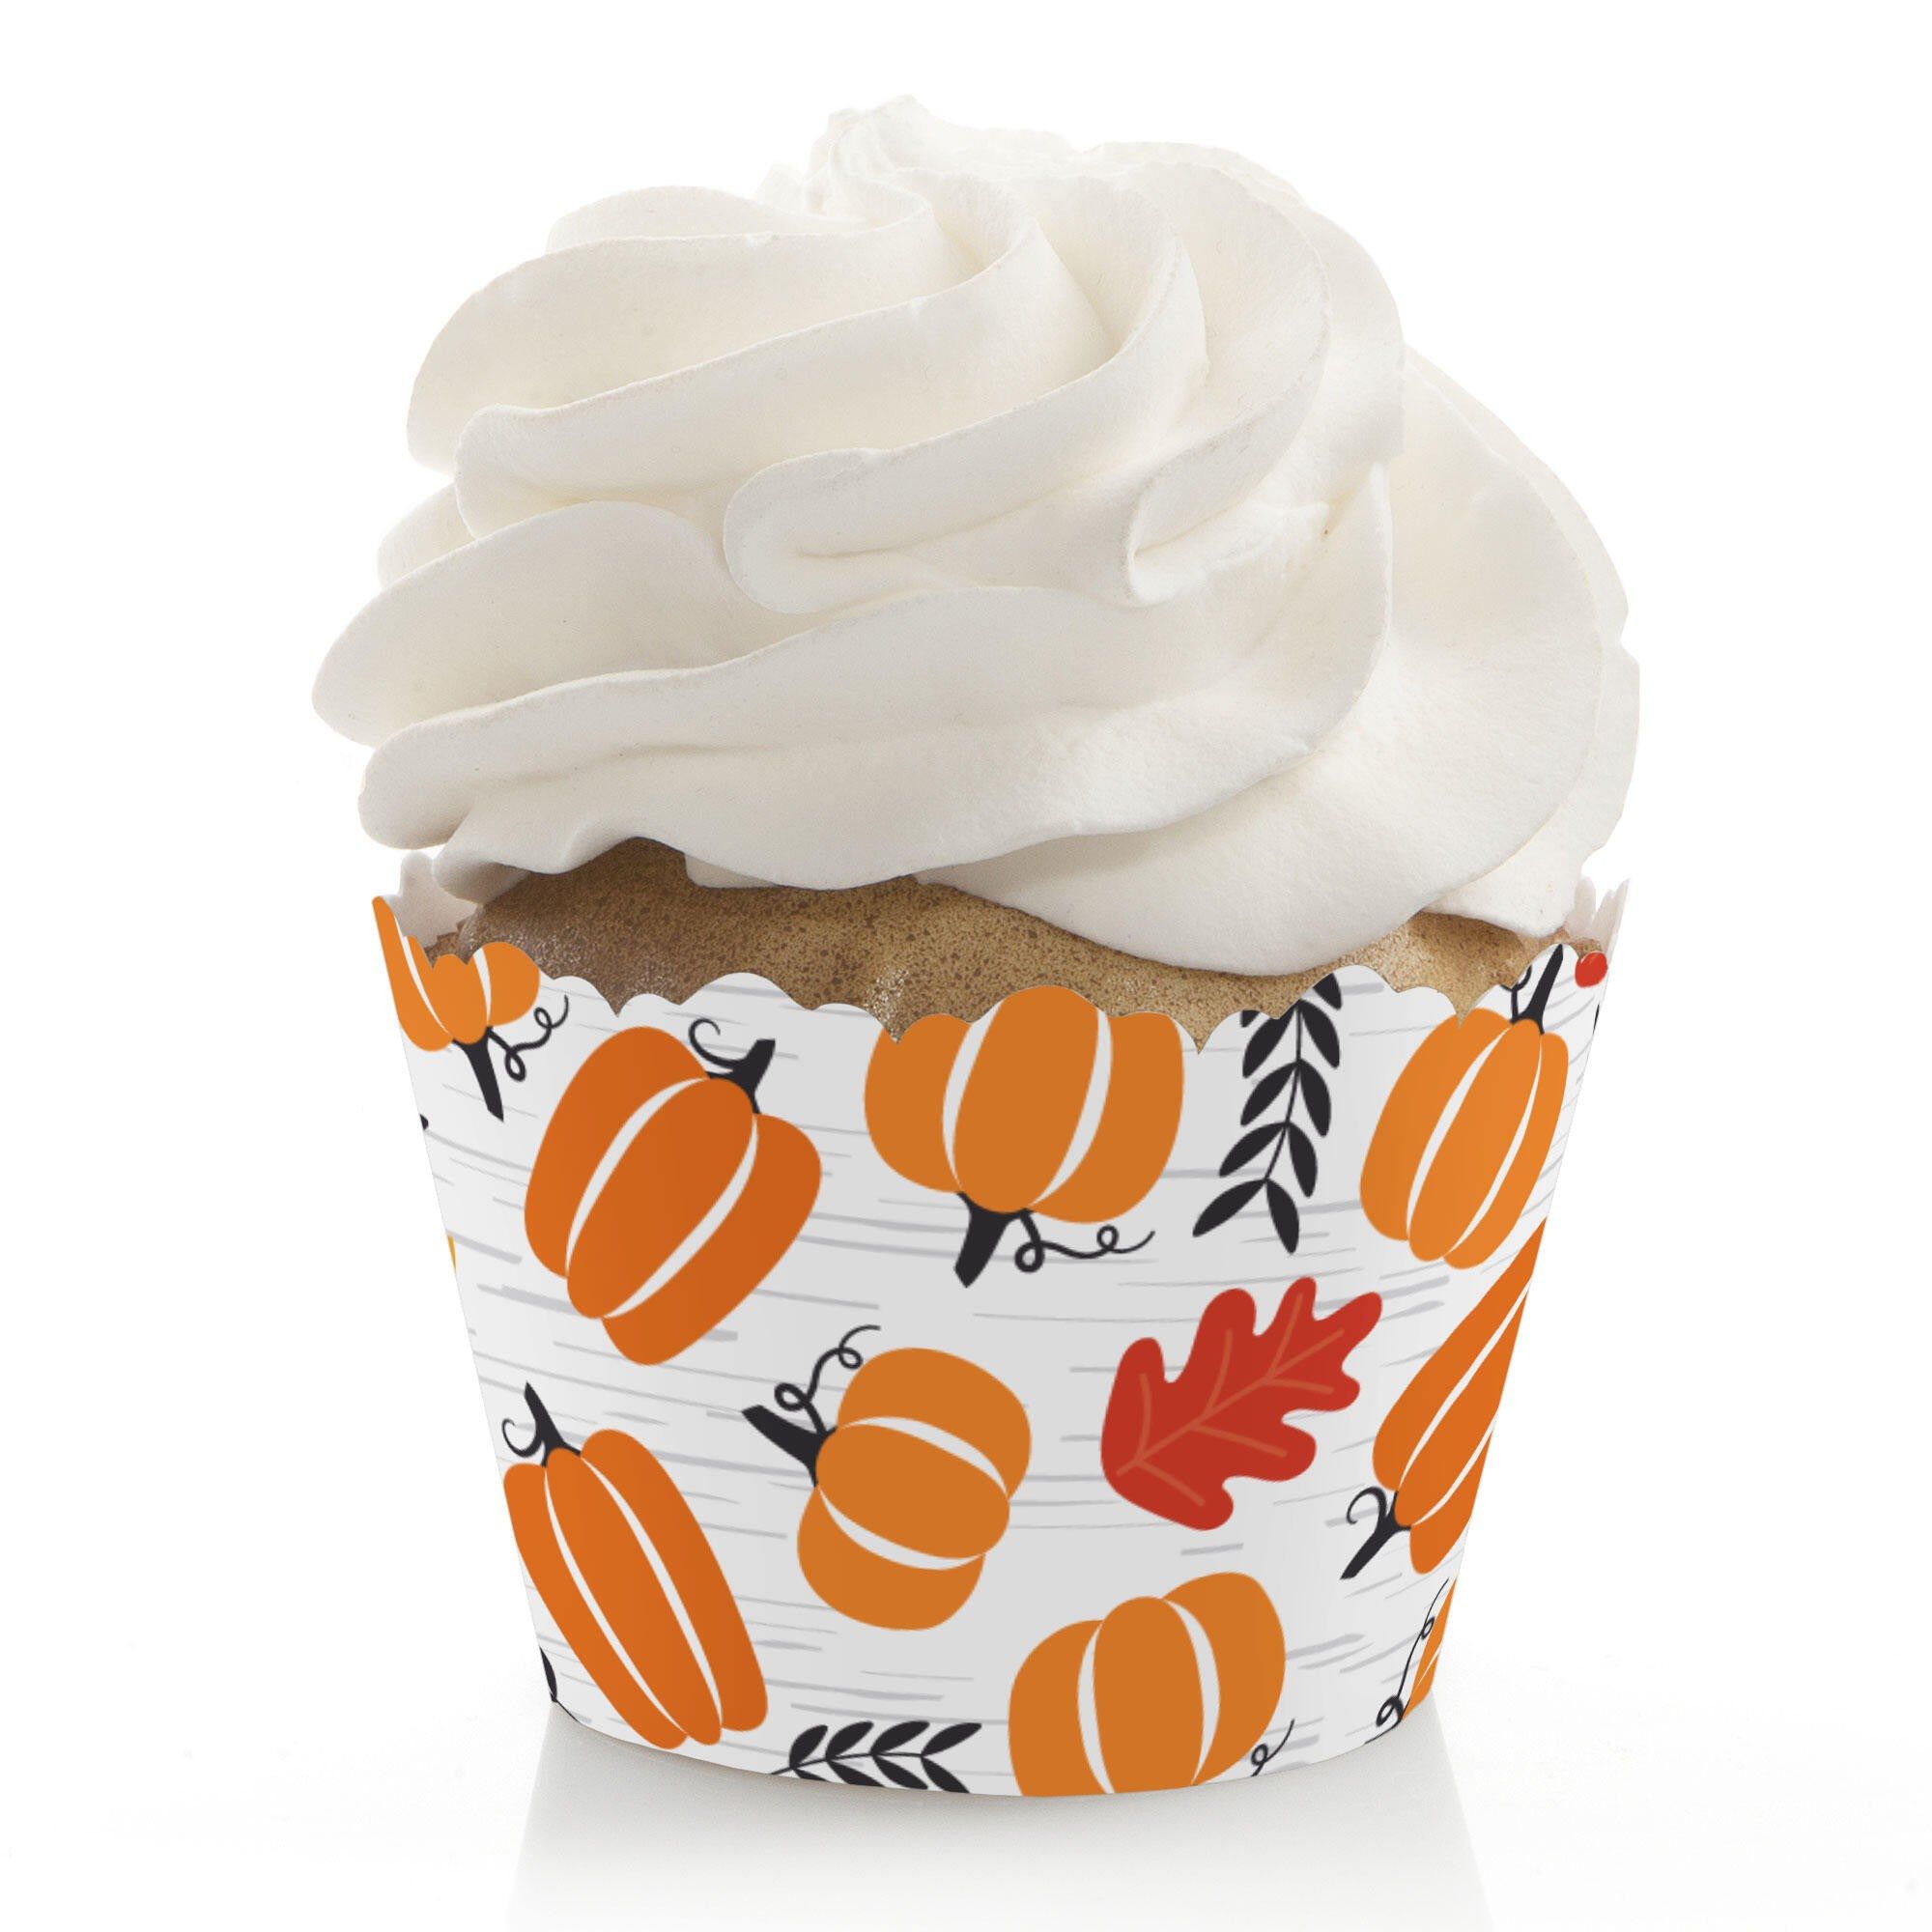 bedbathandbeyond.com | Big Dot of Happiness Fall Pumpkin - Halloween or Thanksgiving Party Decorations - Party Cupcake Wrappers - Set of 12